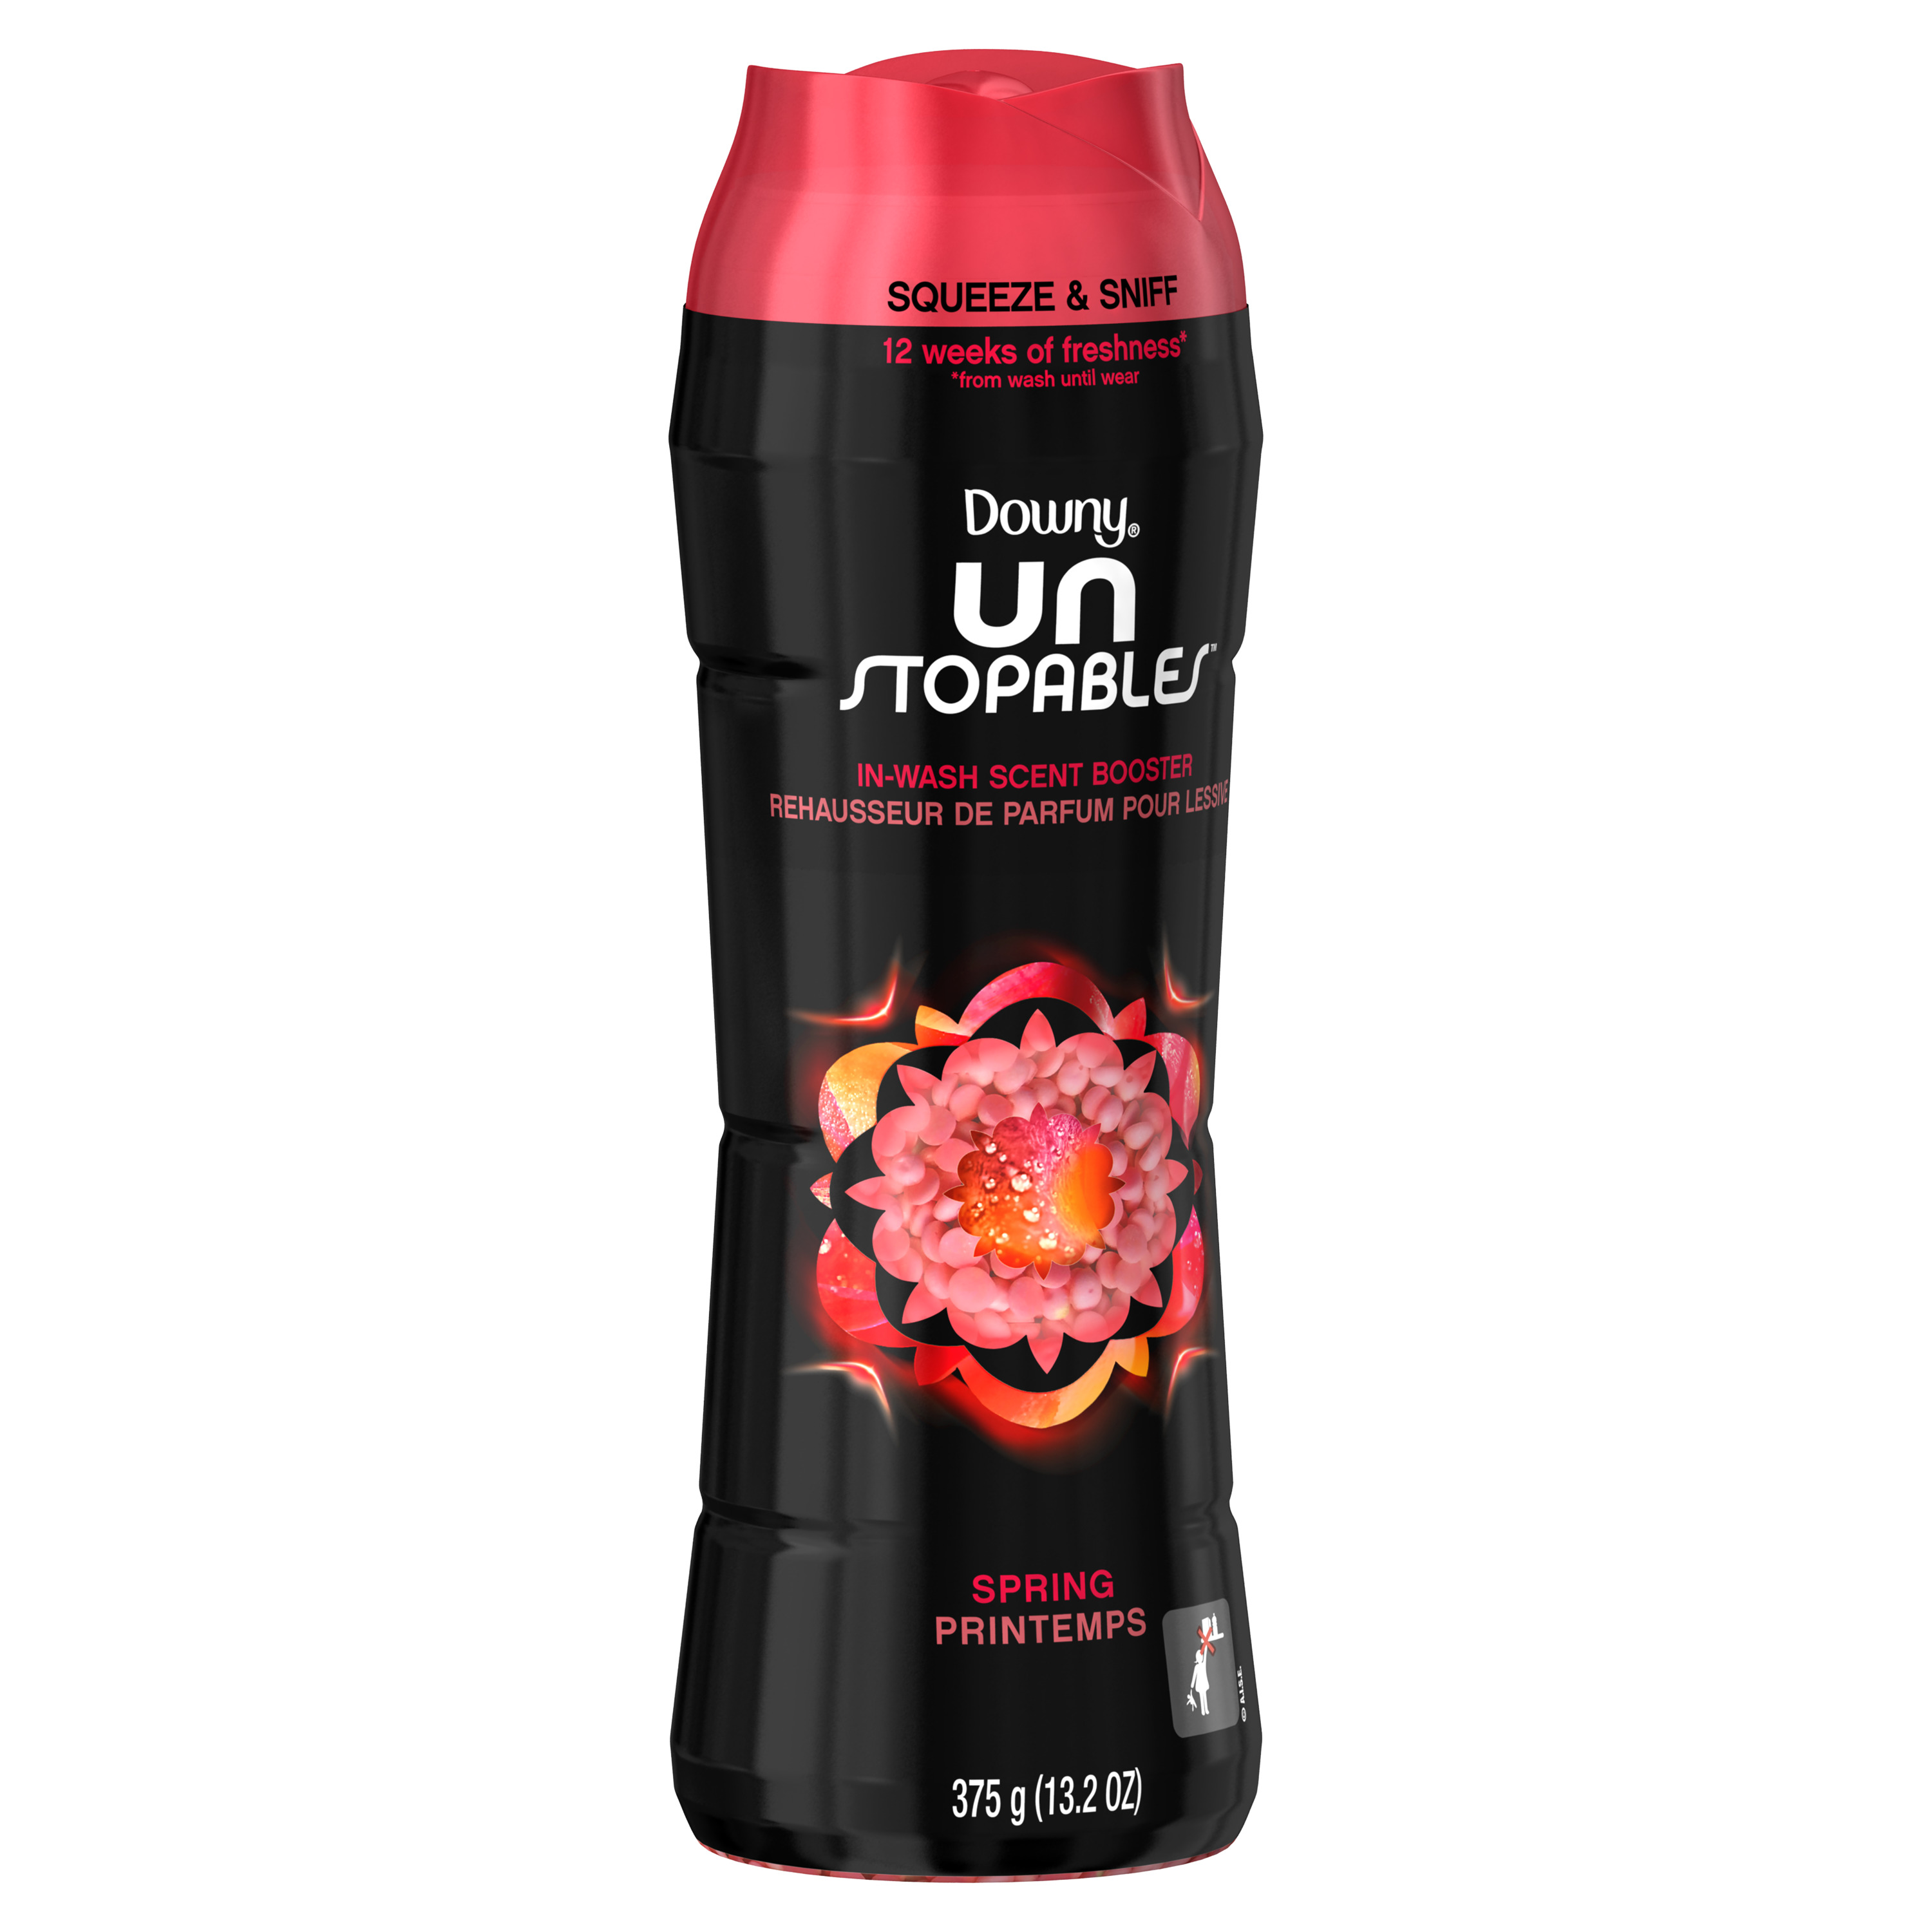 Downy Unstopables In-Wash Scent Booster Beads - SPRING, 13.2 oz. - image 2 of 6